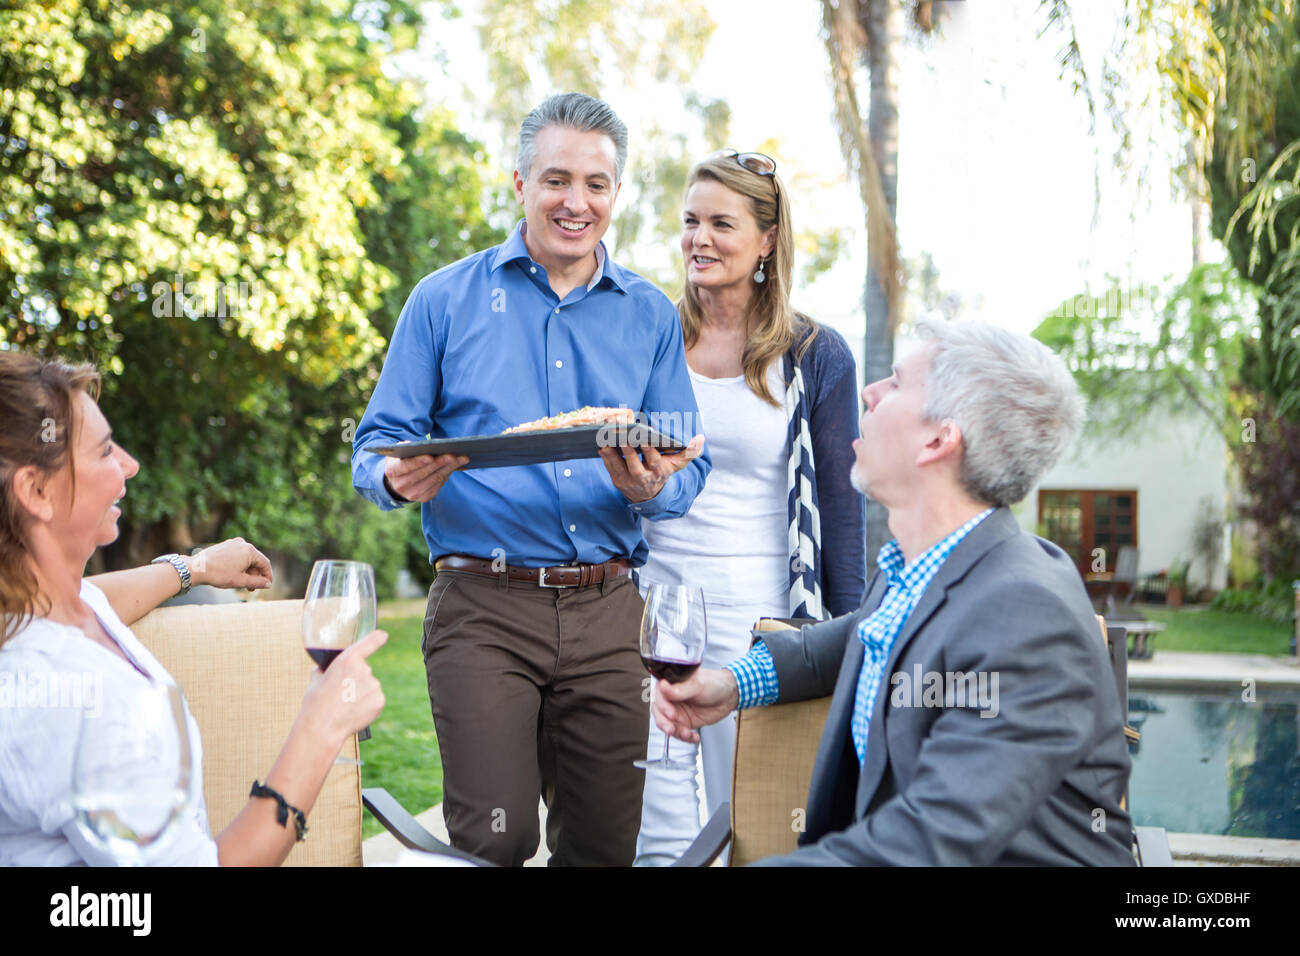 Mature man serving fish cuisine at garden party Stock Photo